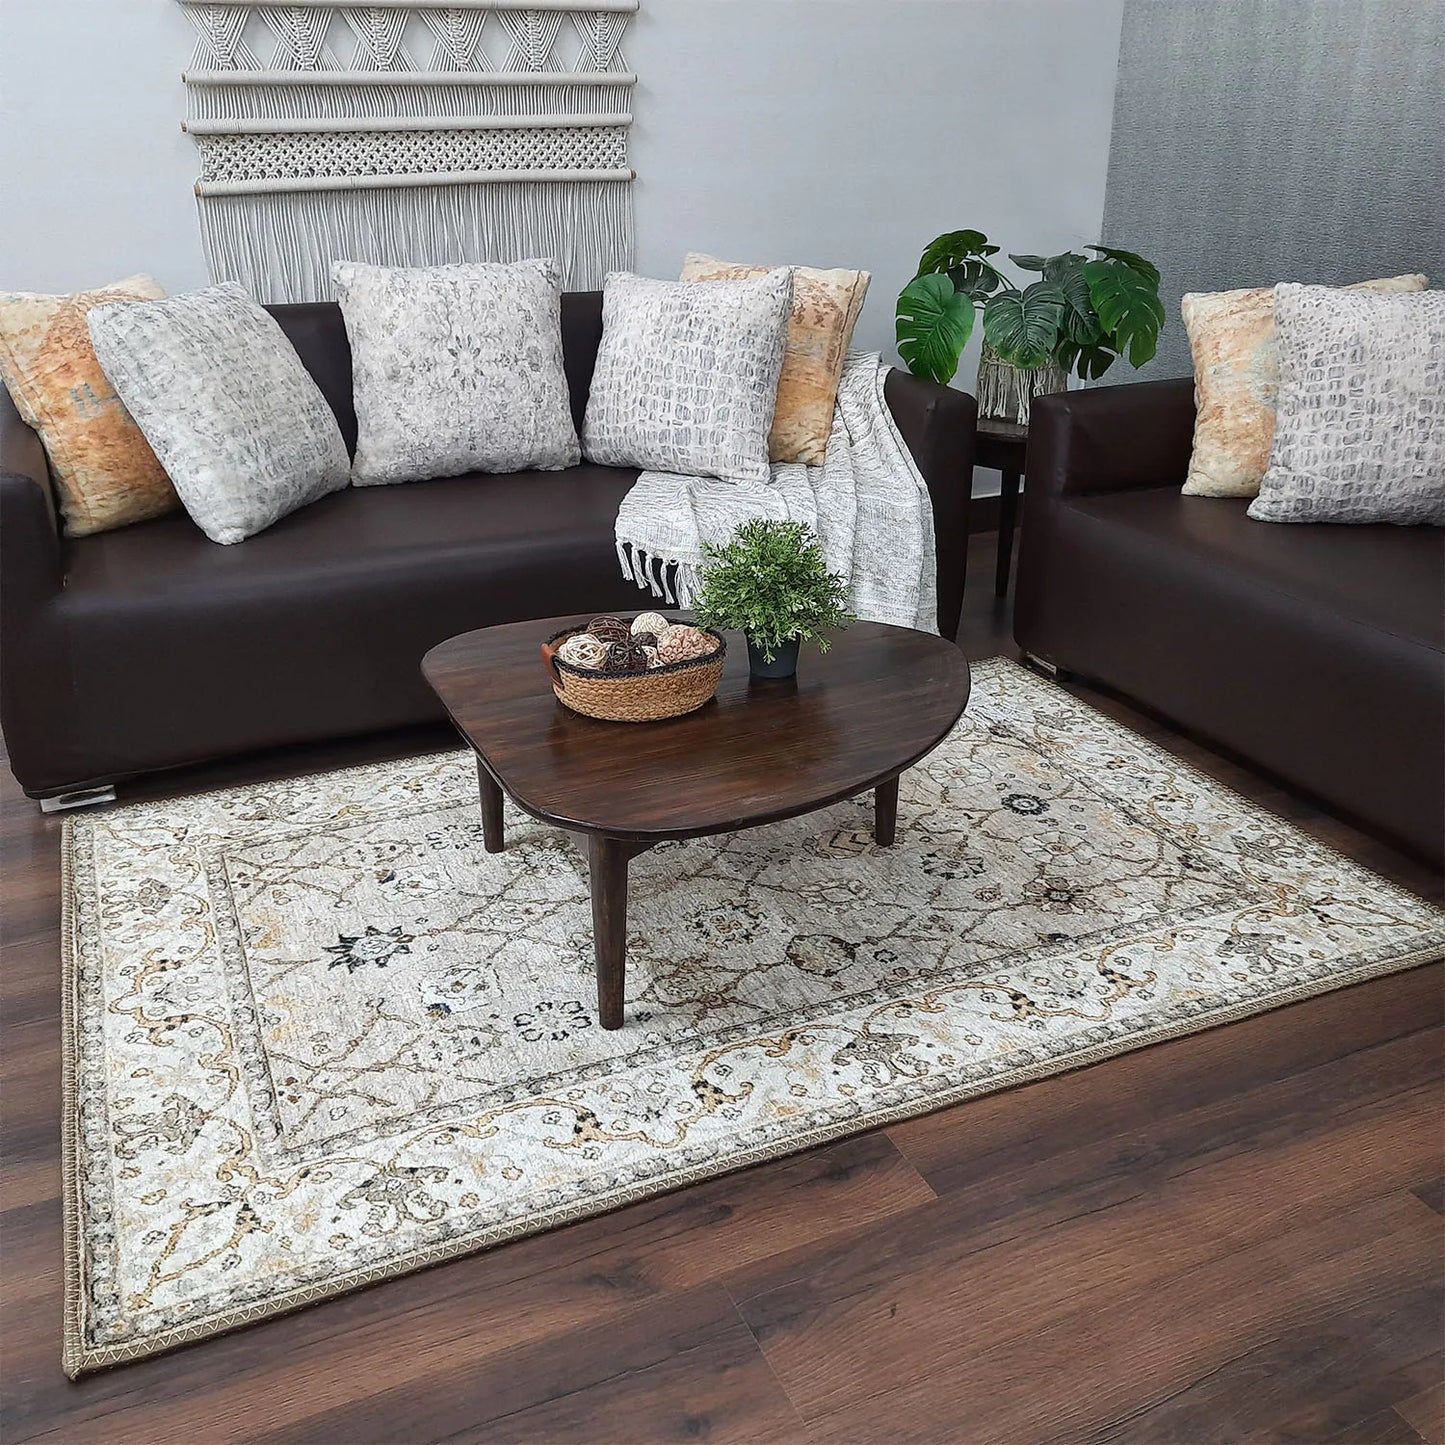 Avioni Home Faux Silk Carpet for Your Living Room | Persian Design | Washable Rug | Earthy Elegance Collection